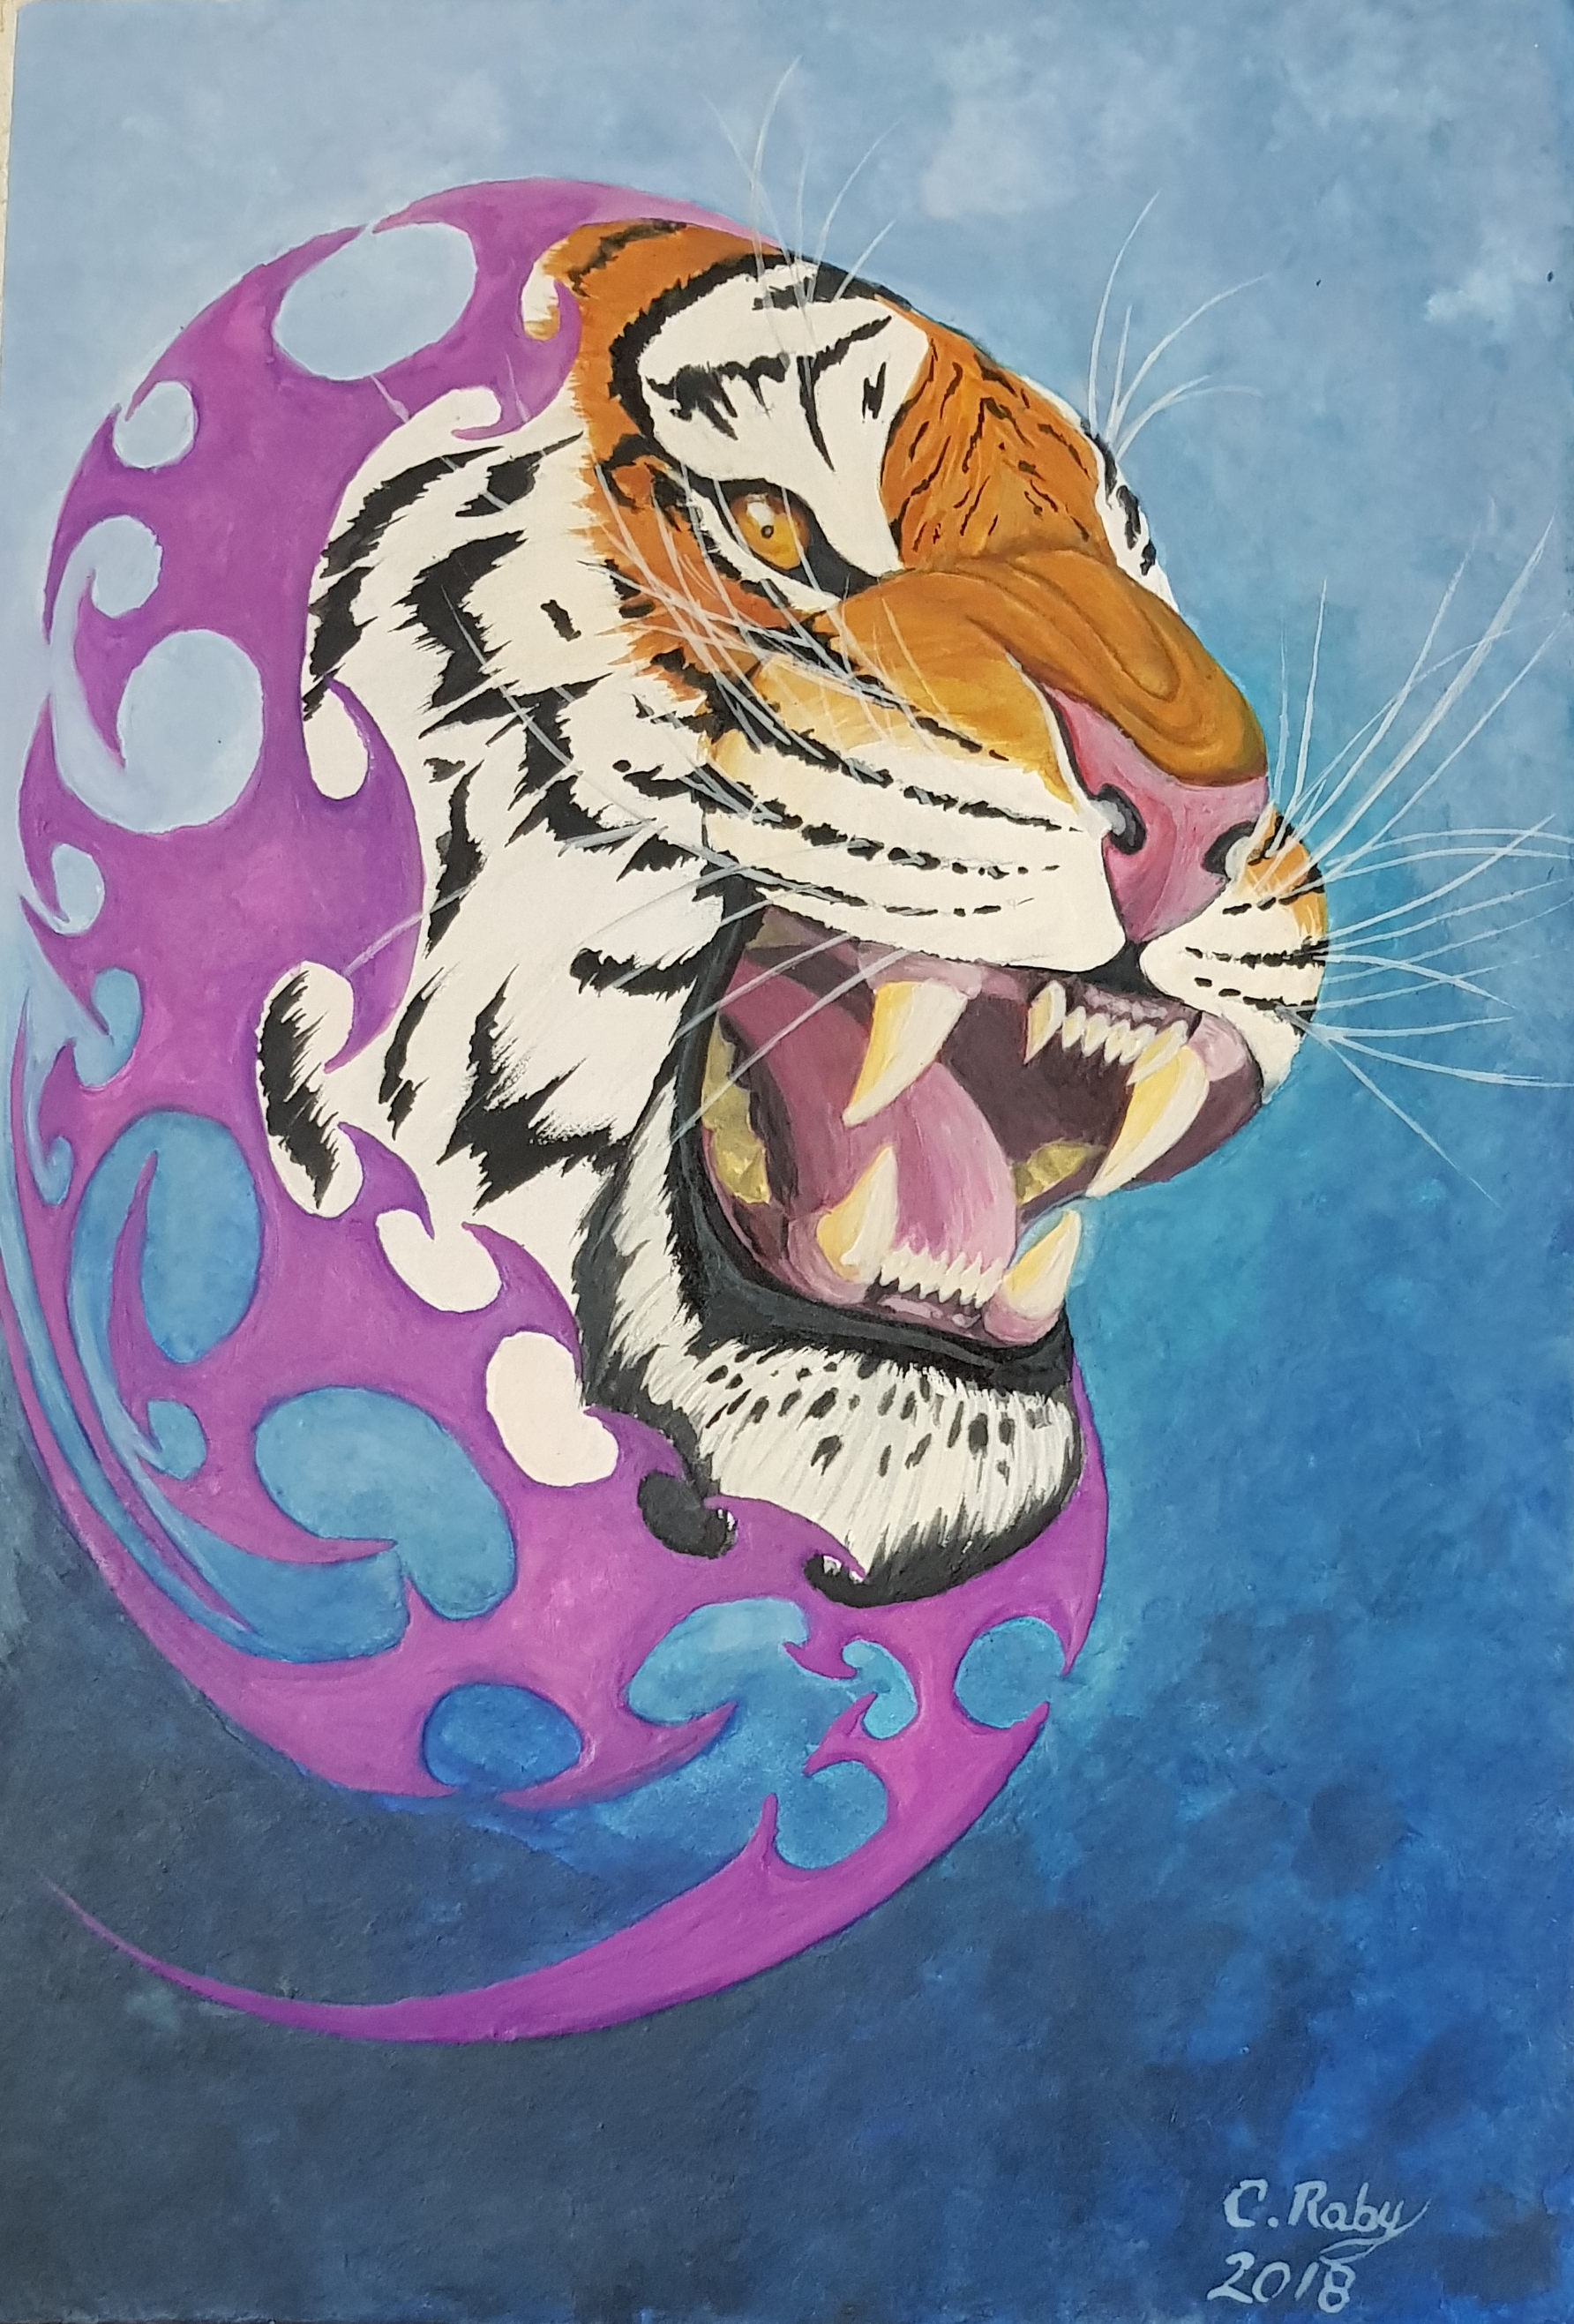 art-Charles-Raby-Tigerhead-out-of-pink-and-blue